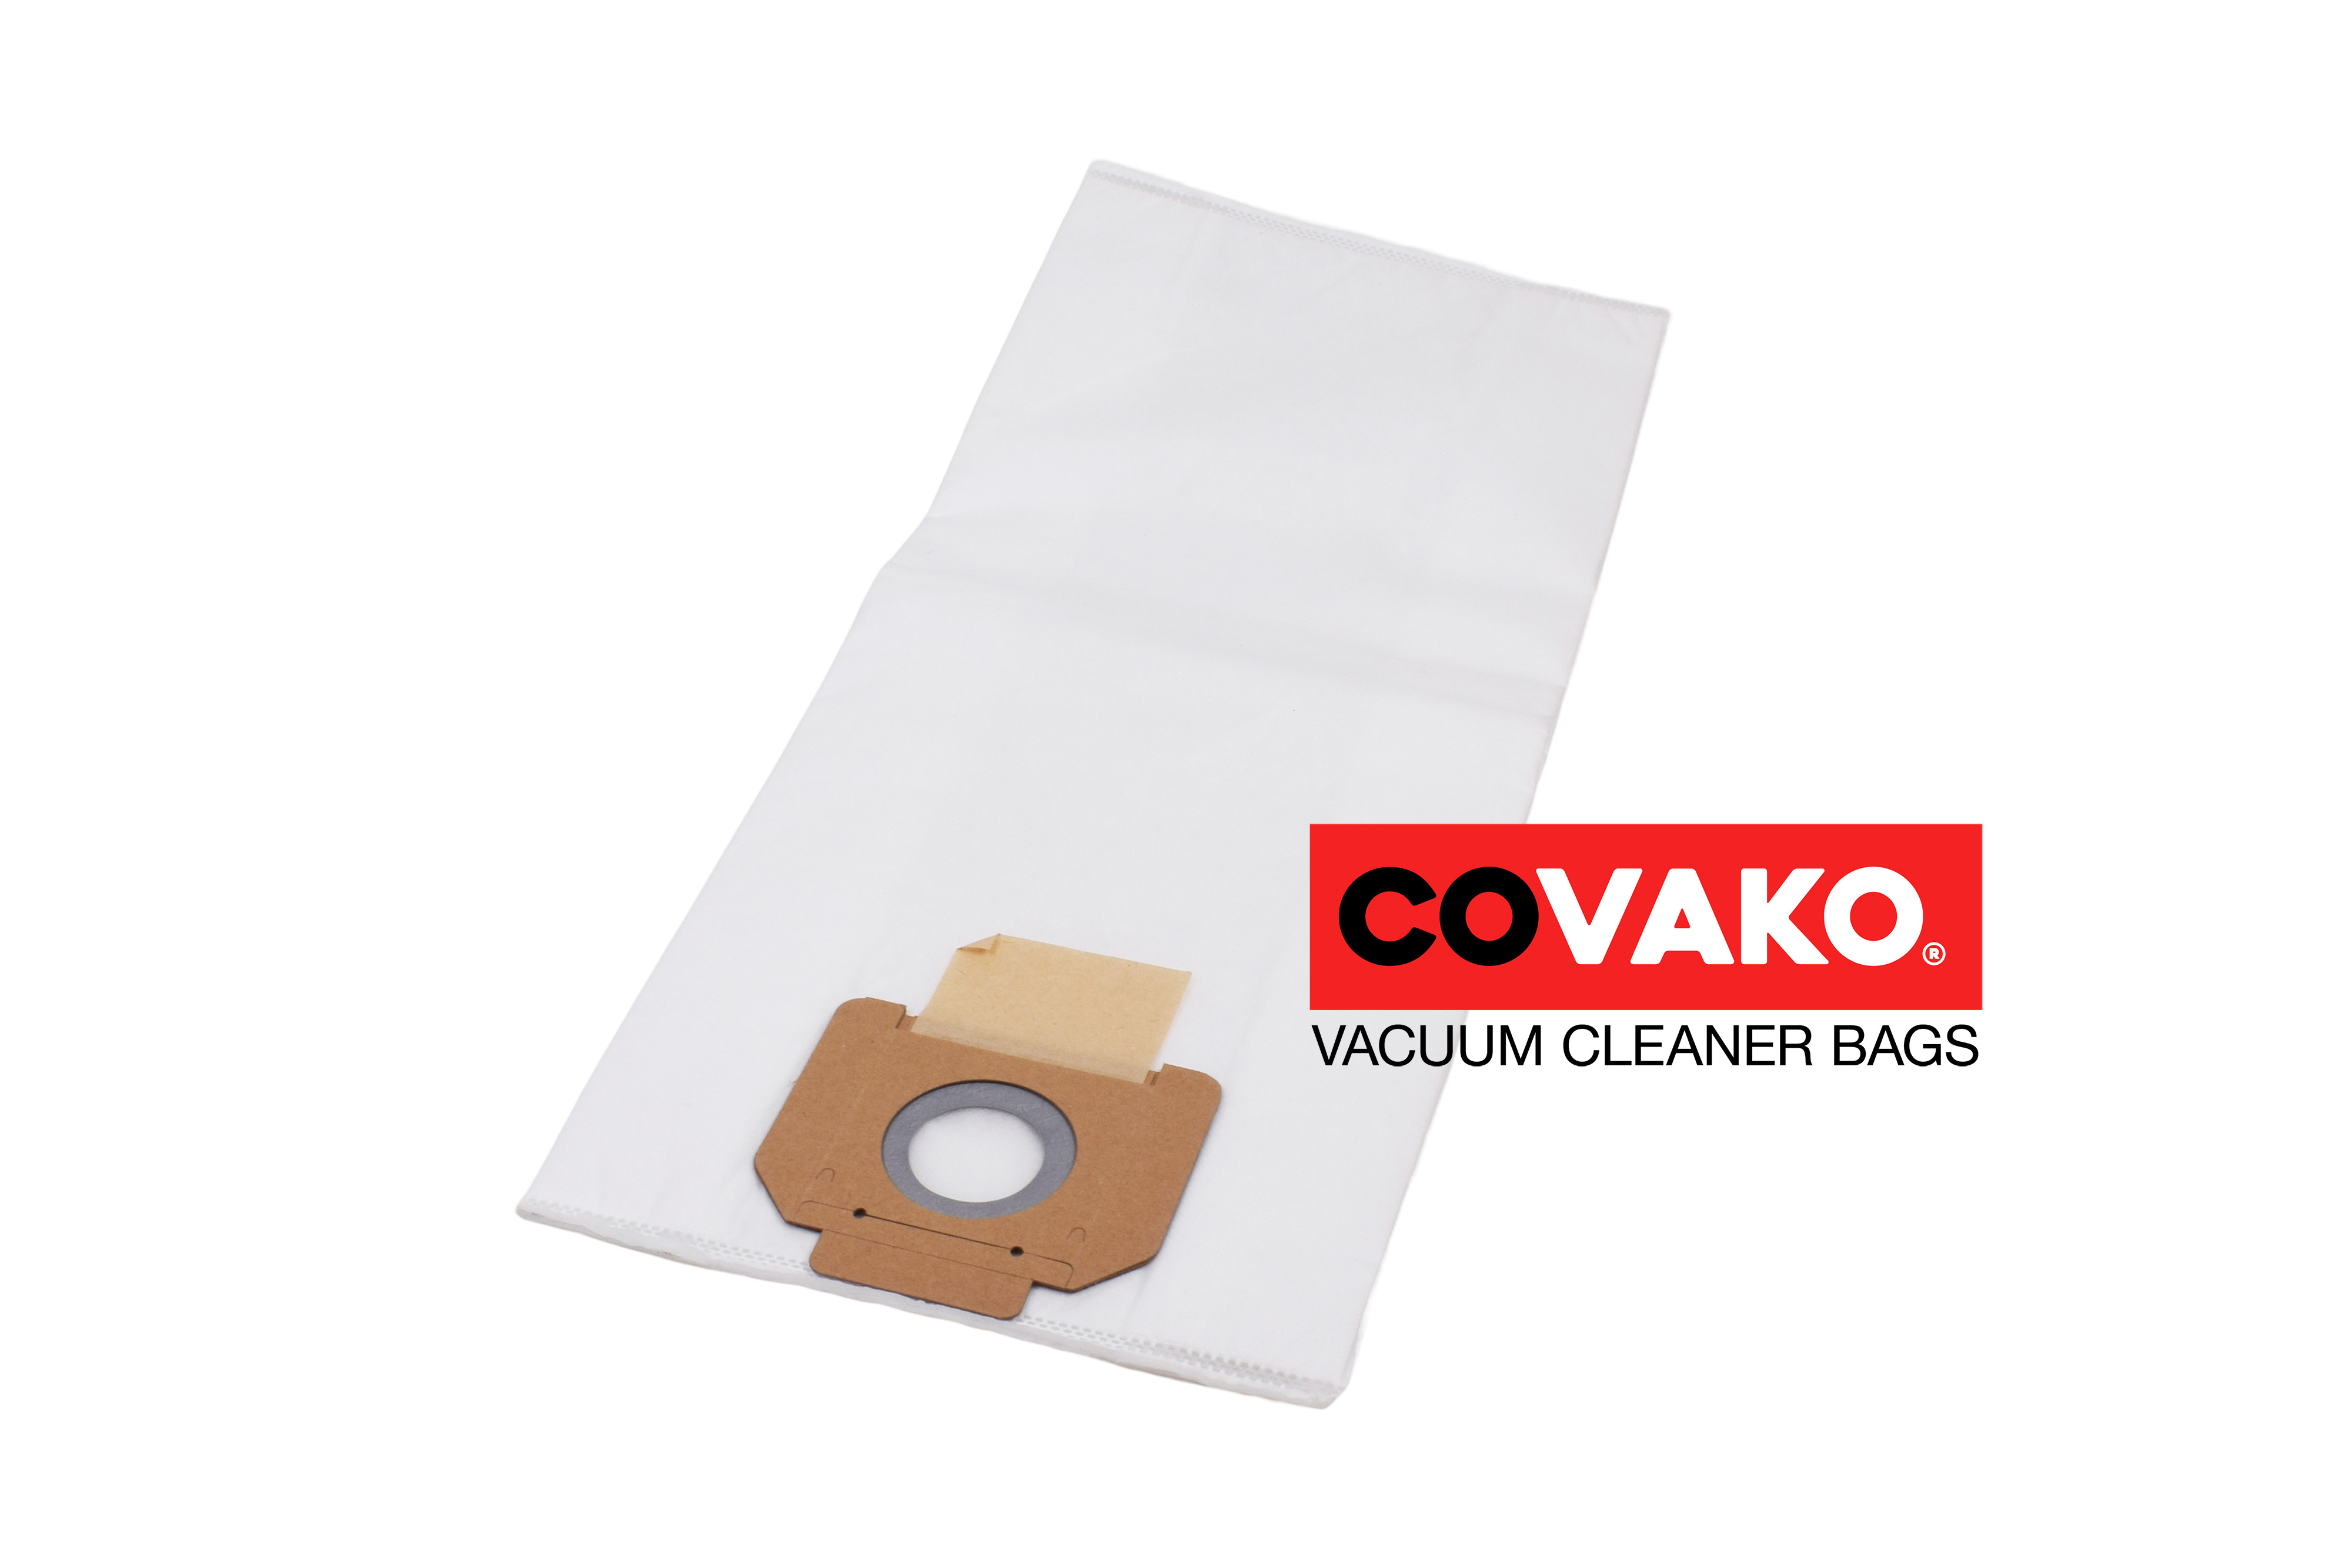 Soteco Nevada 515 / Synthesis - Soteco vacuum cleaner bags